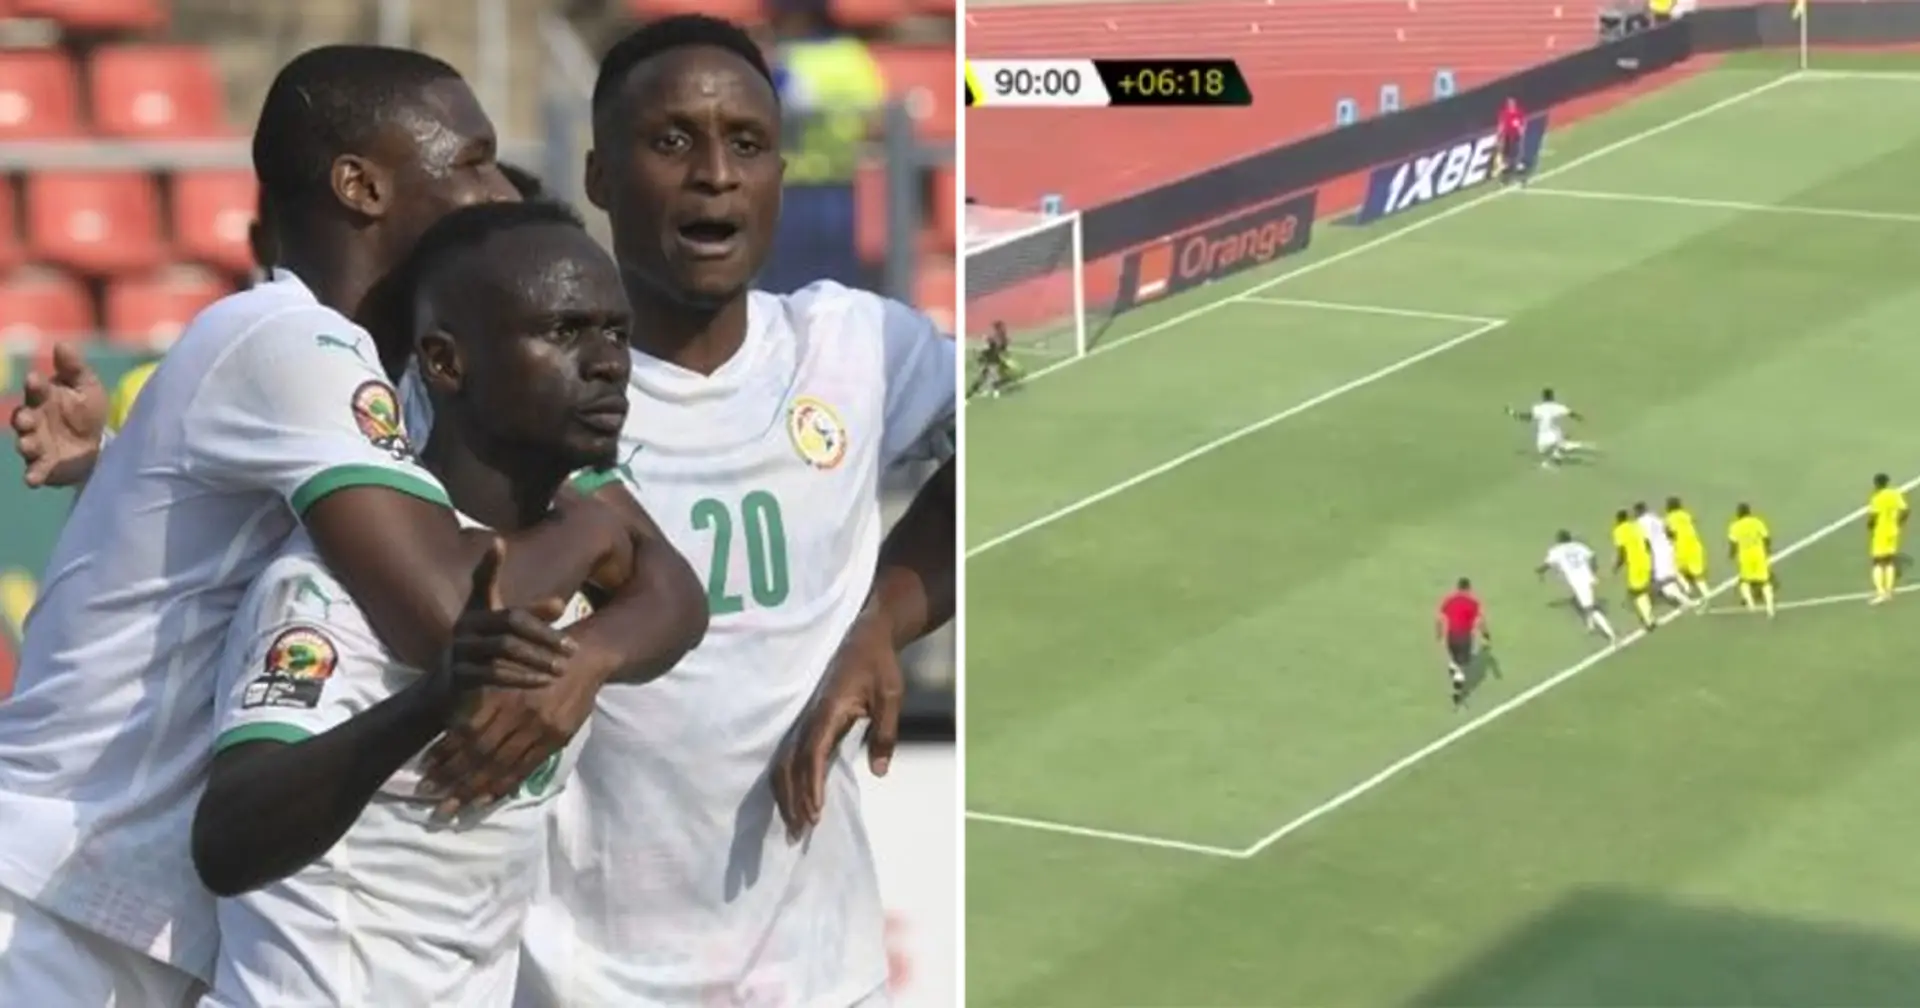 Sadio Mane scores last-minute penalty to win AFCON opener for Senegal